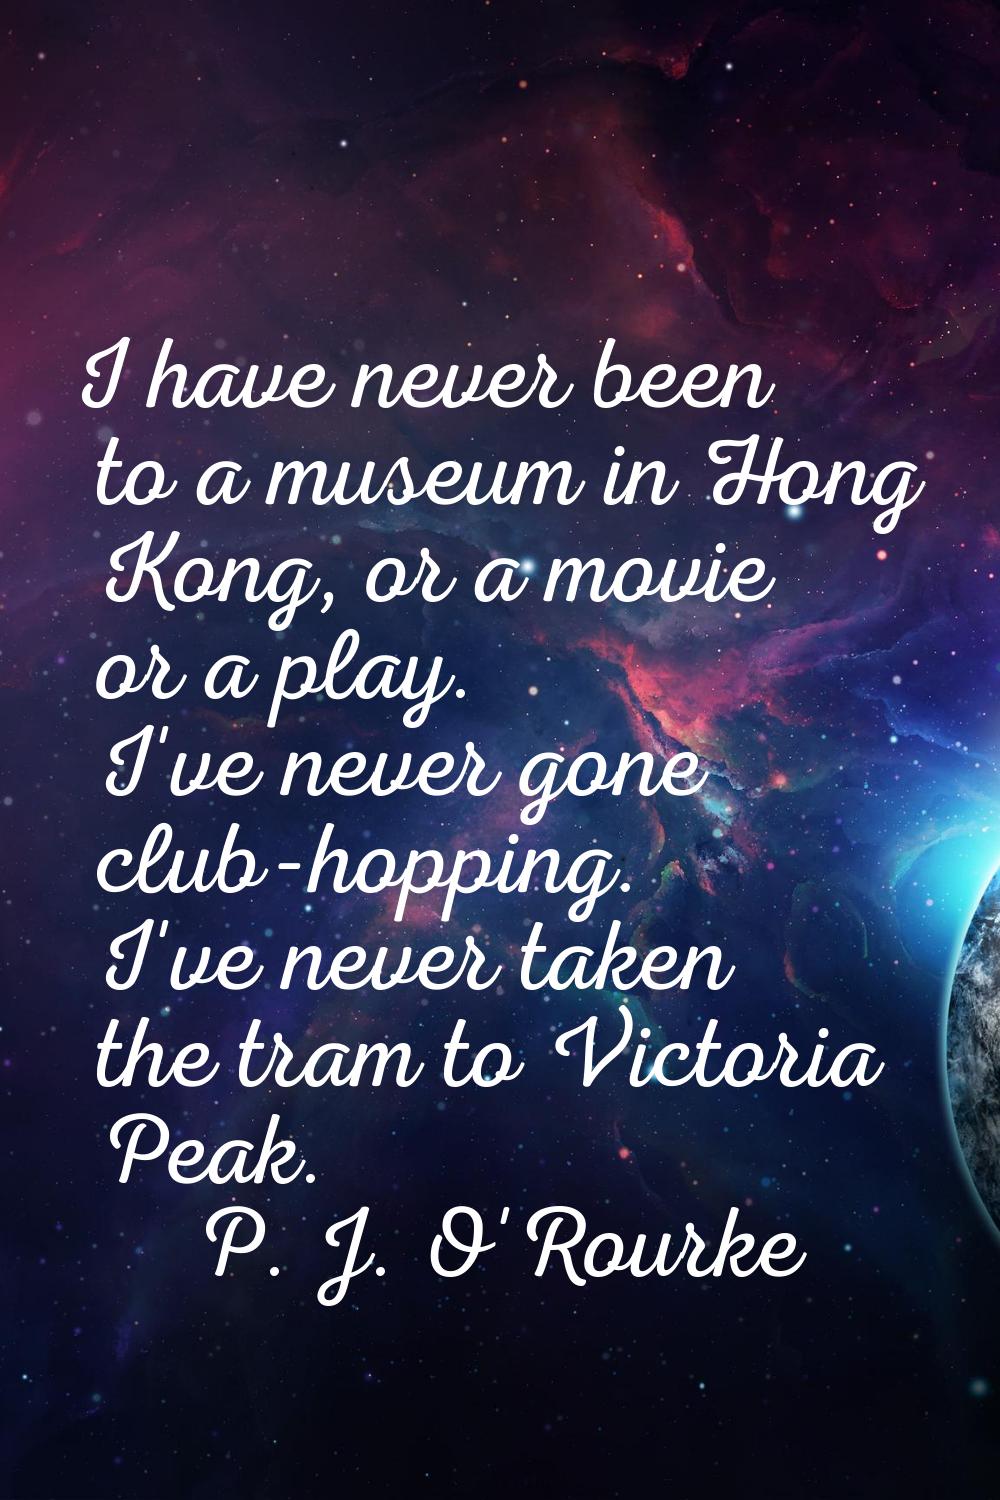 I have never been to a museum in Hong Kong, or a movie or a play. I've never gone club-hopping. I'v